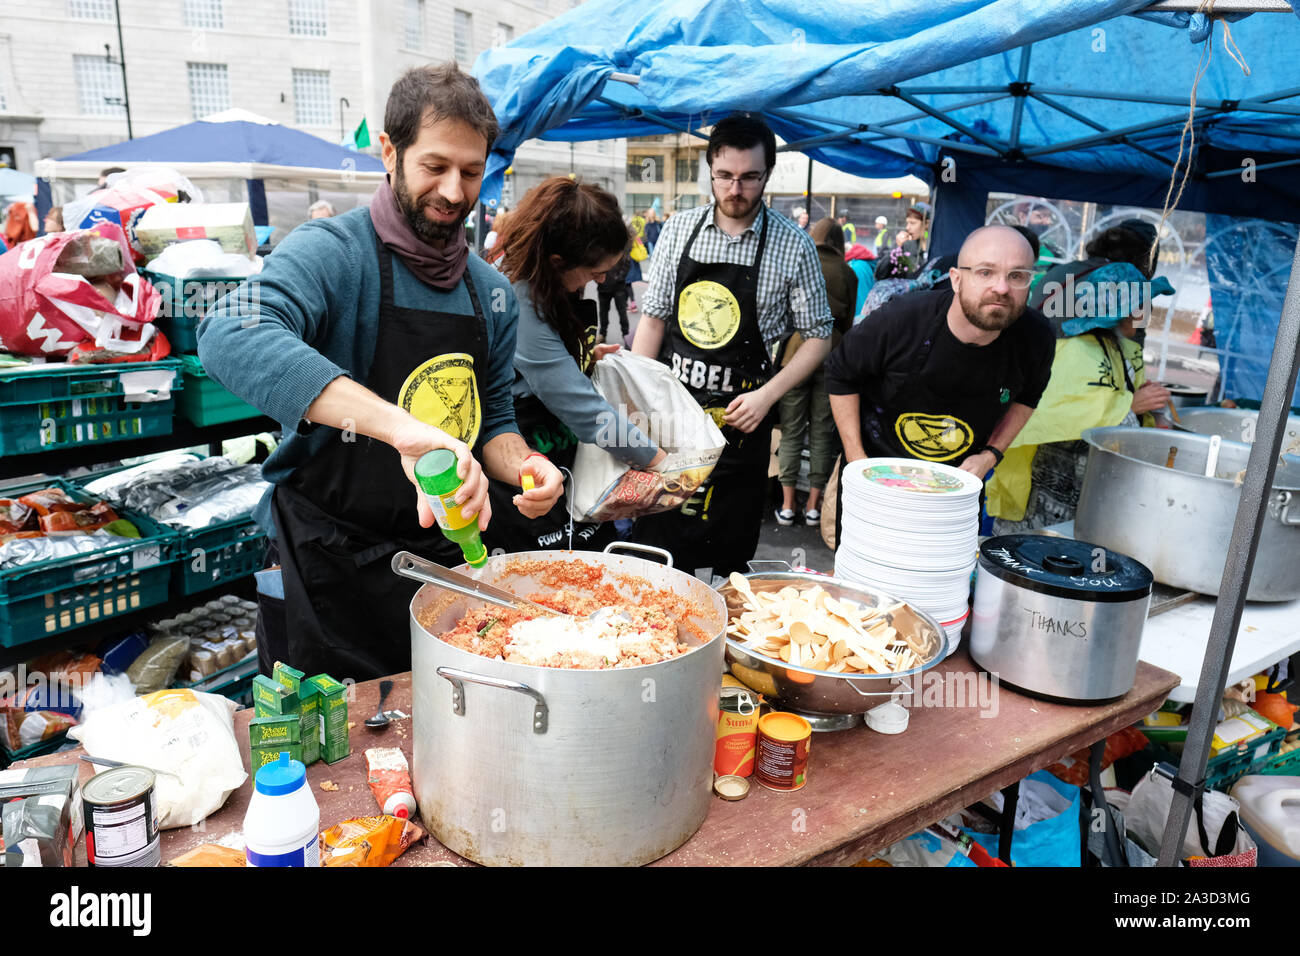 Westminster, London, UK - Monday 7th October 2019 - Extinction Rebellion XR climate protesters cook up food for their supporters at an impromptu field street kitchen beside Lambeth Bridge. Photo Steven May / Alamy Live News Stock Photo